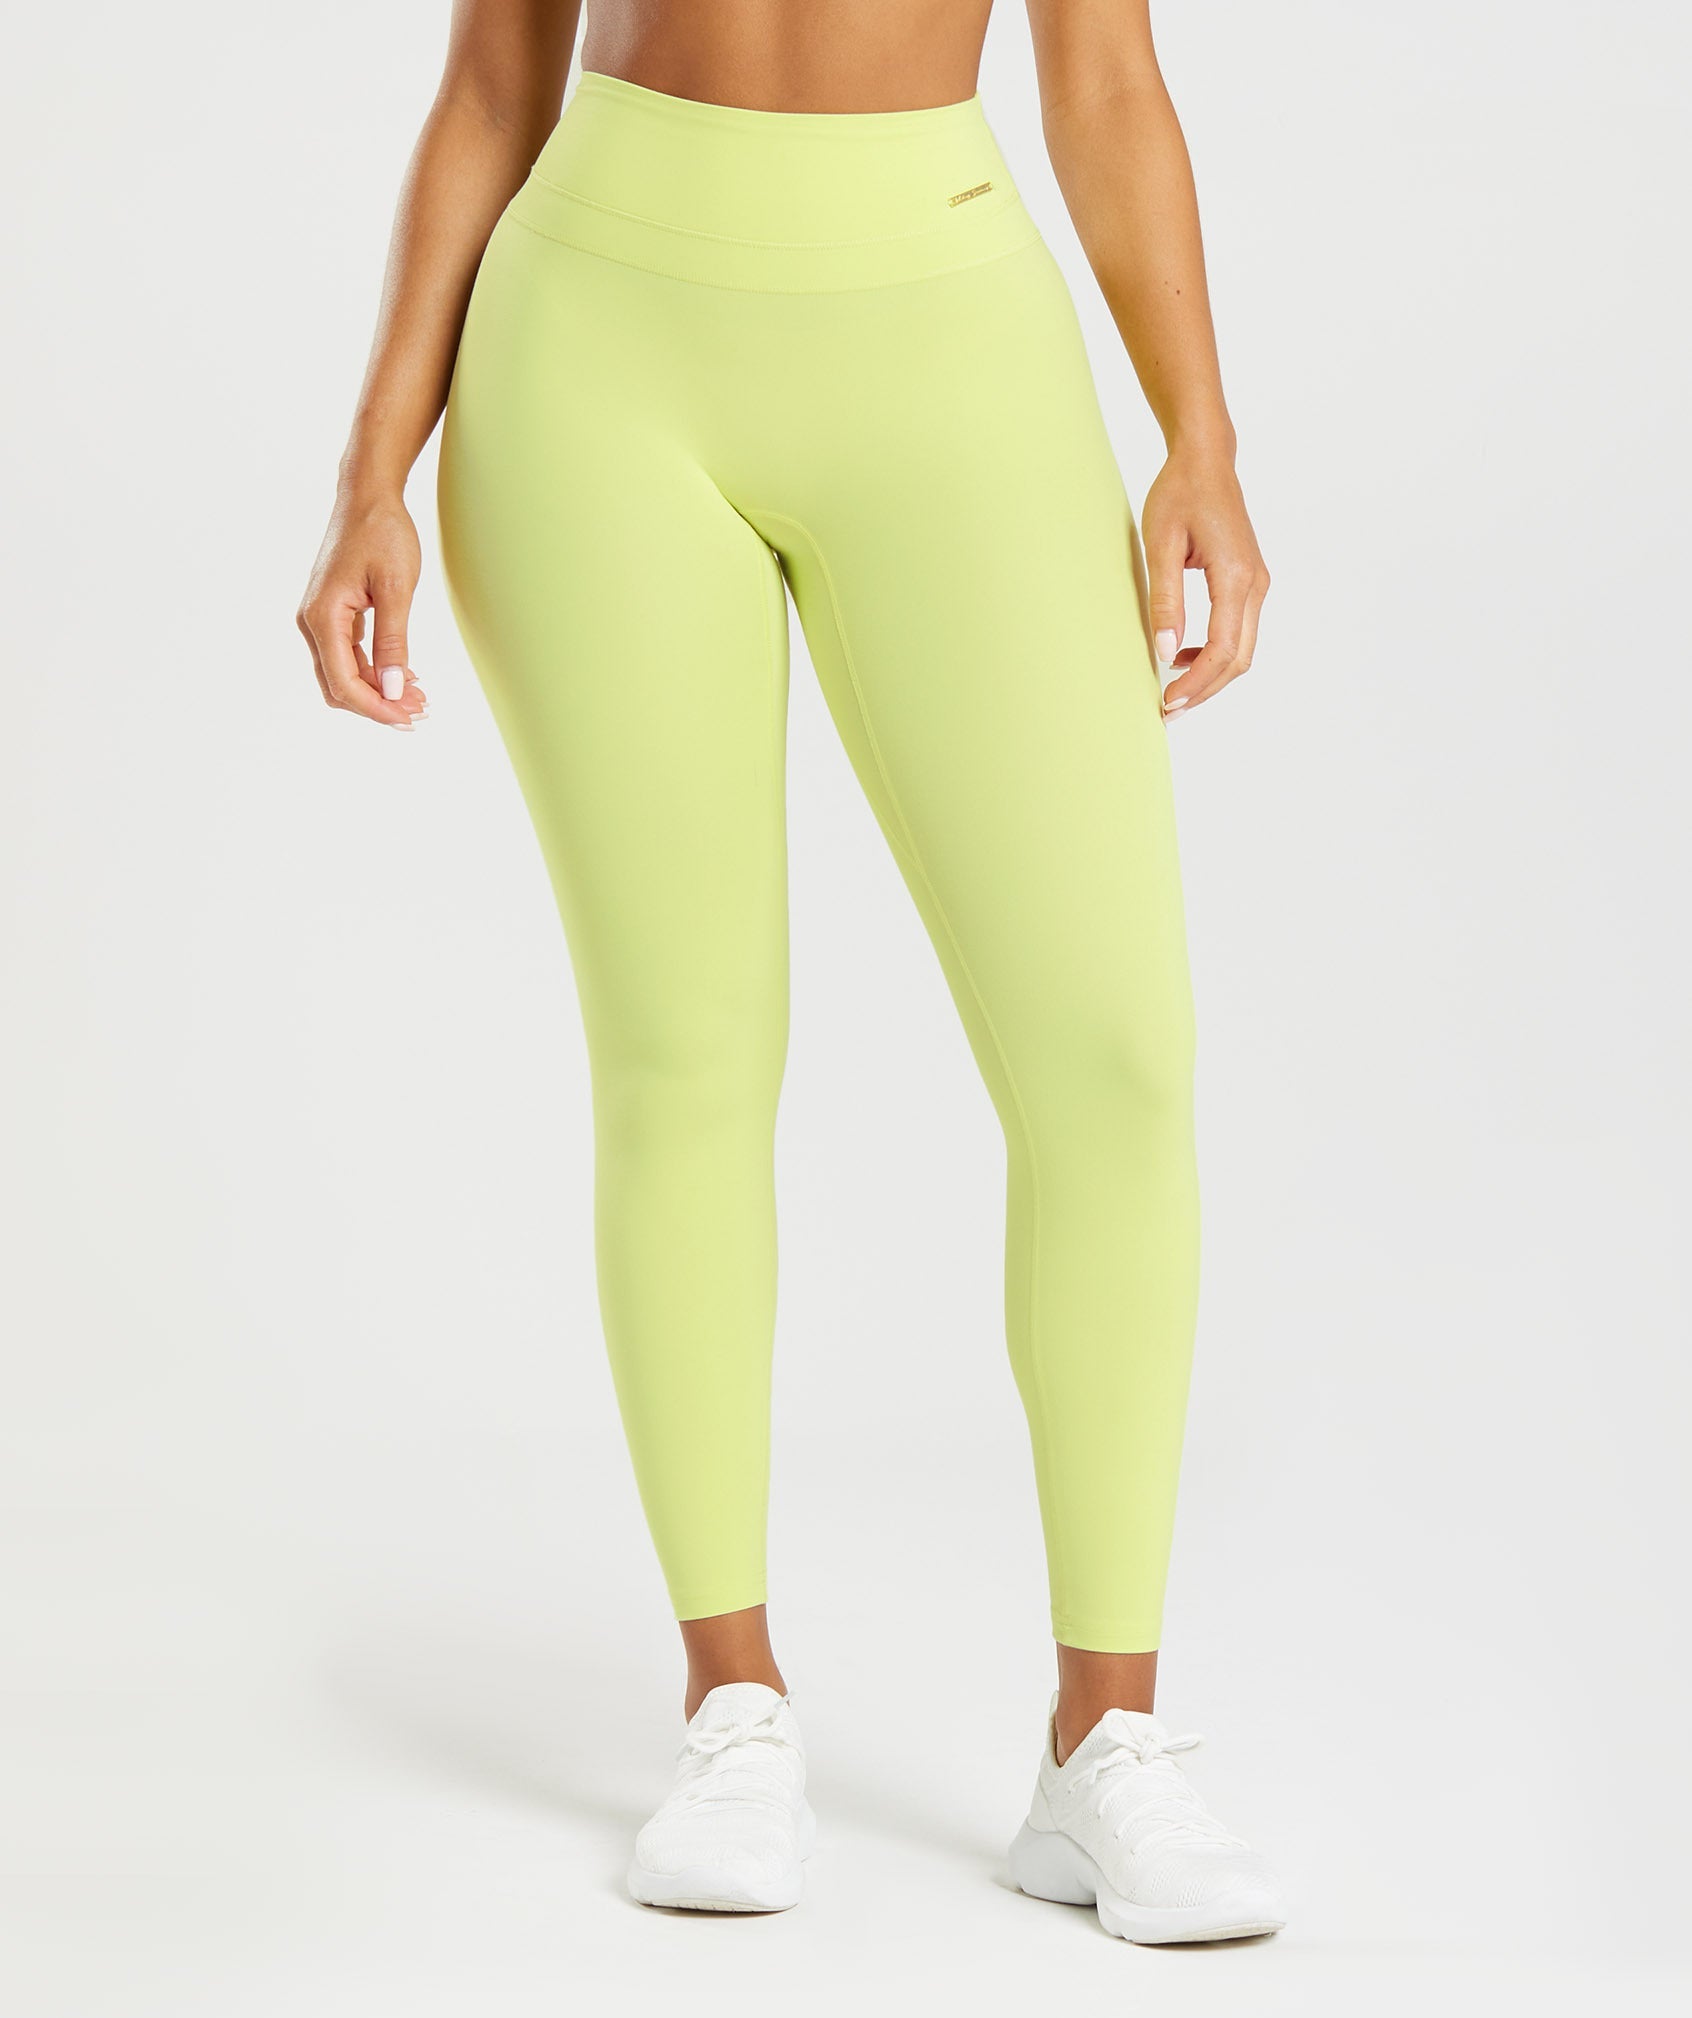 Gymshark Whitney Simmons Green Size XS - $25 - From Hannah